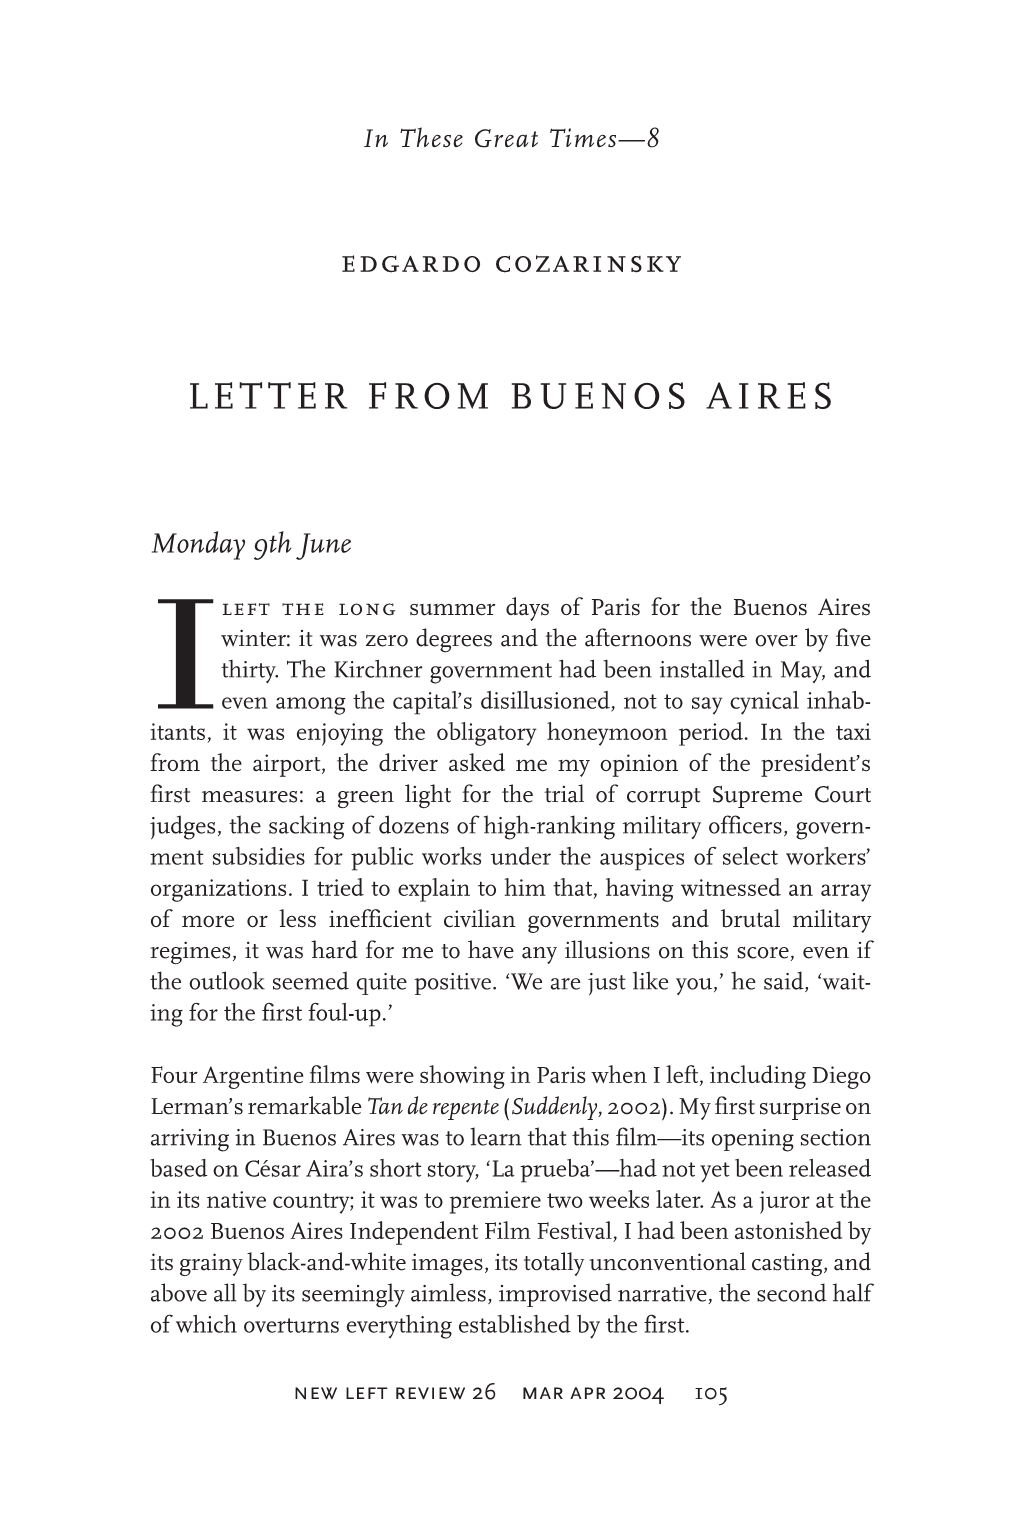 Letter from Buenos Aires